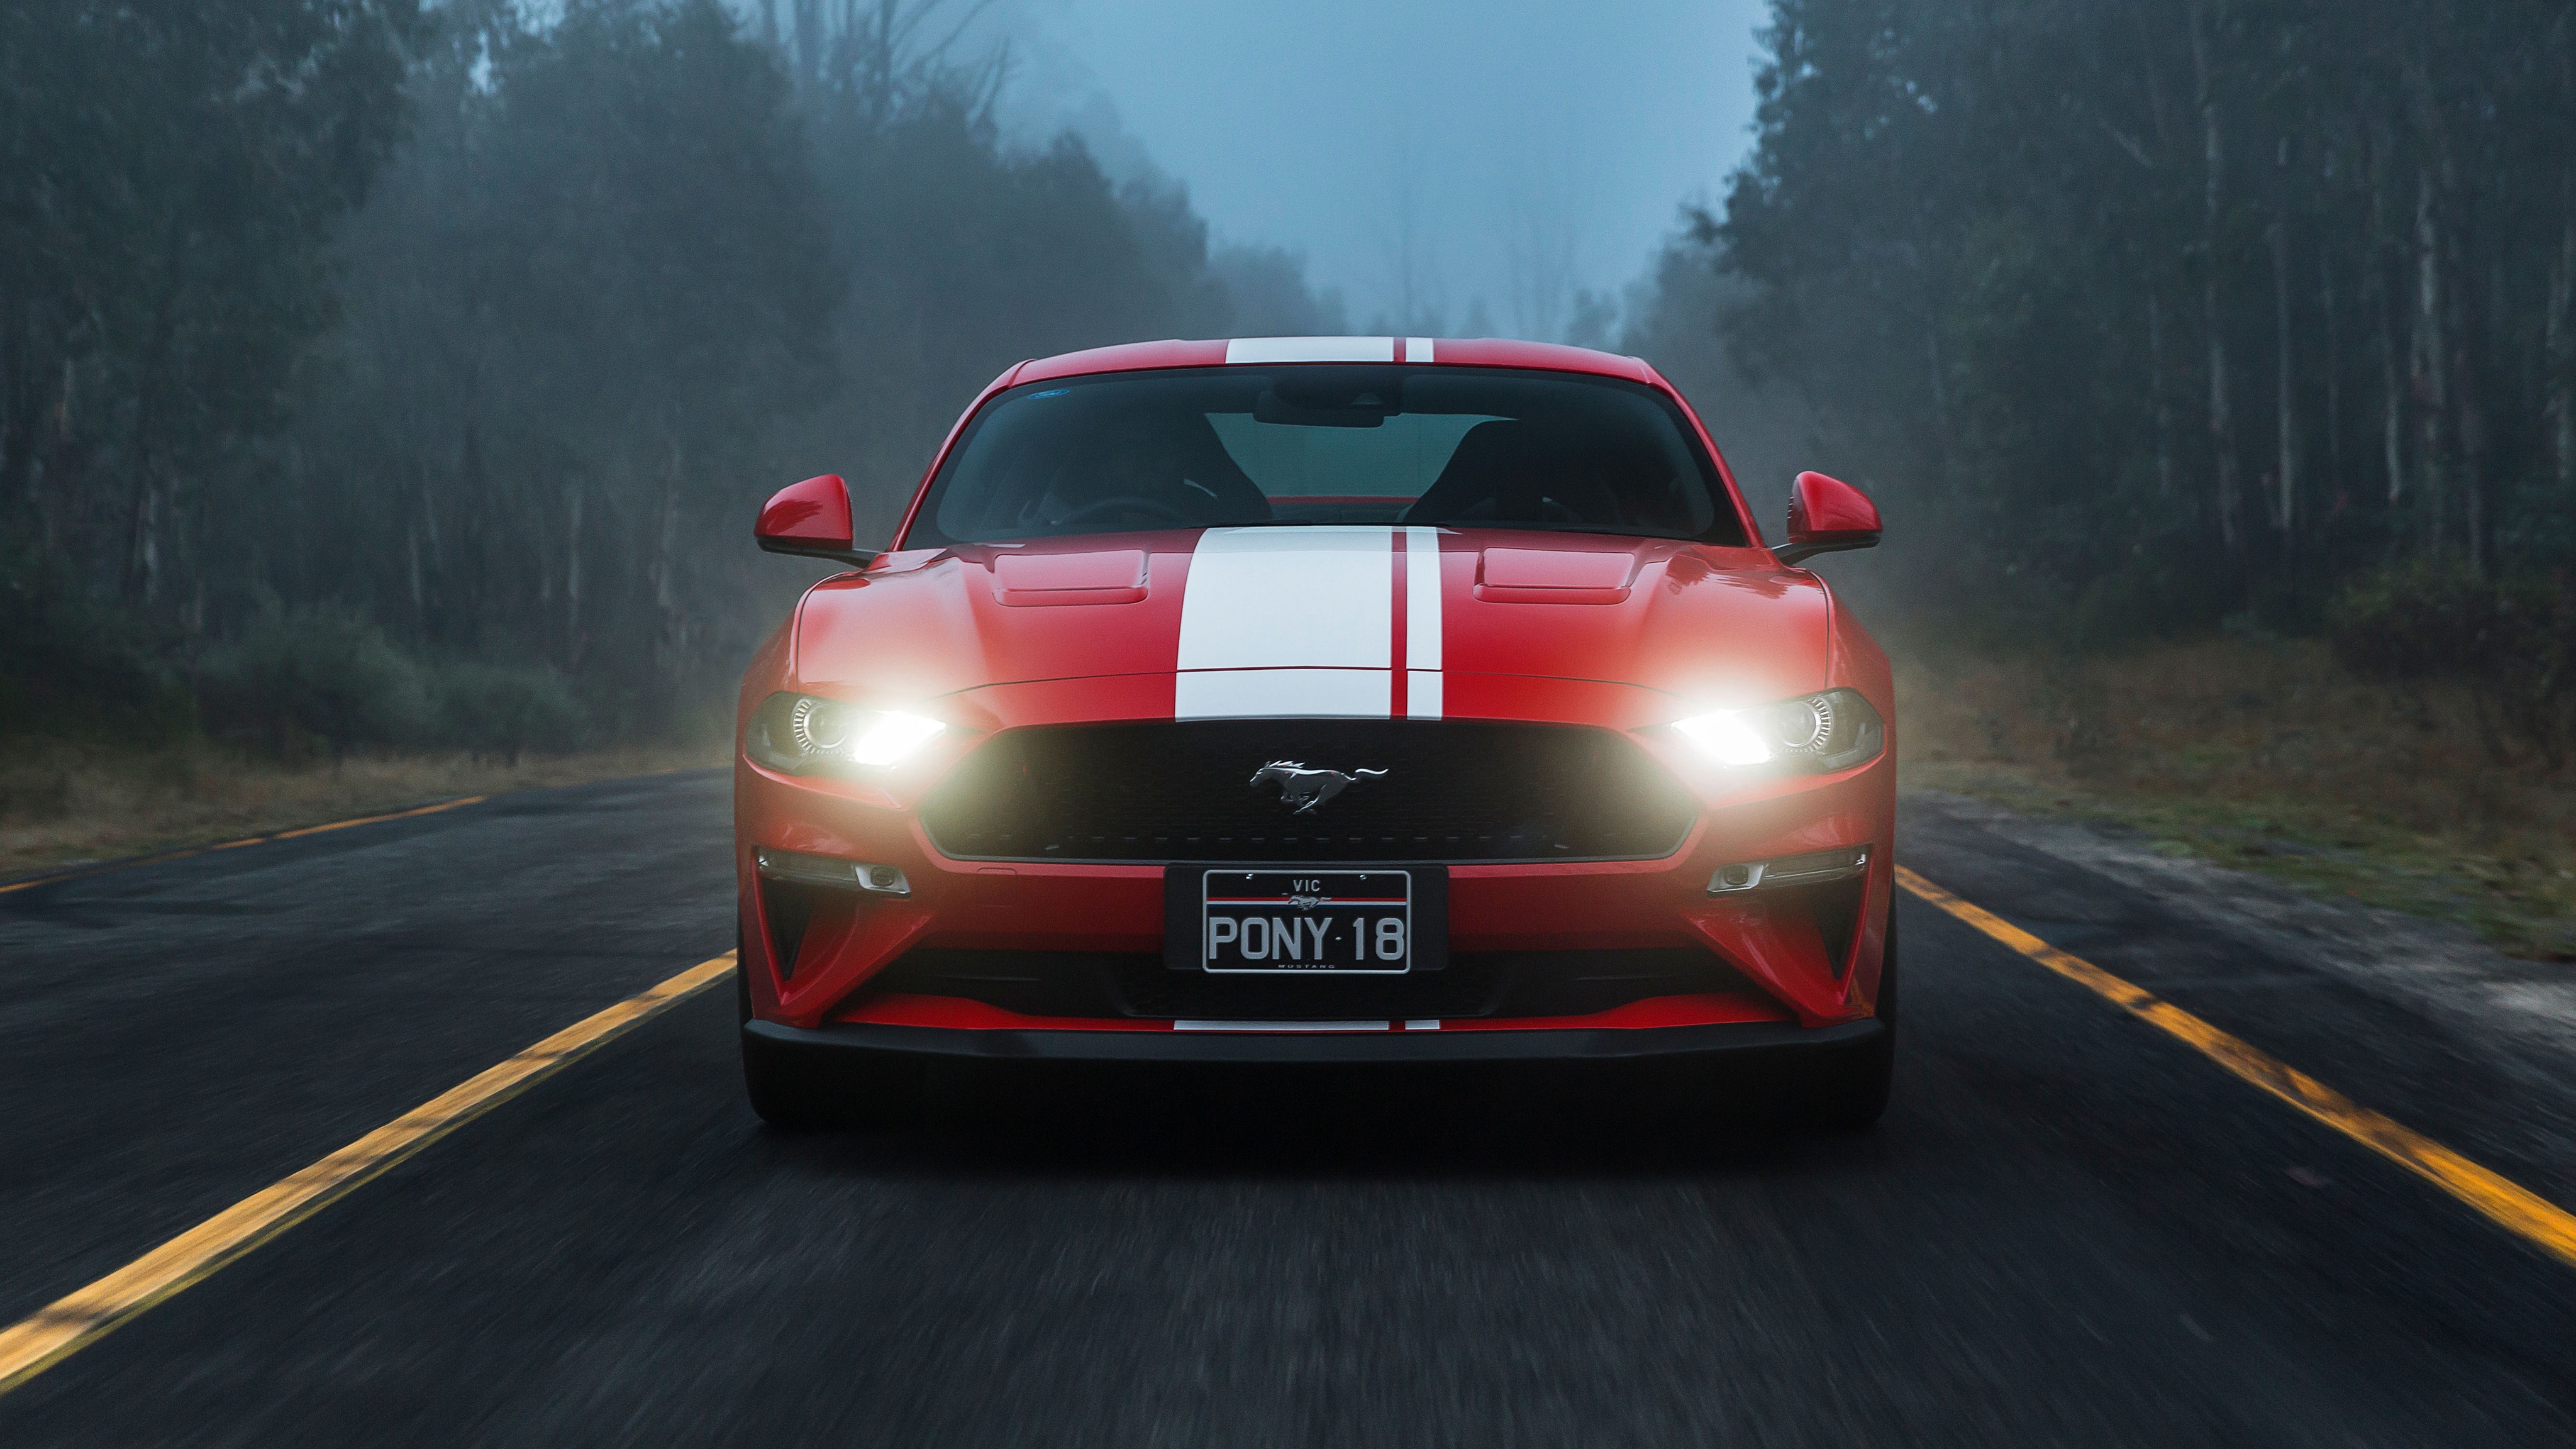 Car Ford Ford Mustang Ford Mustang Gt Muscle Car Red Car Vehicle 4096x2304